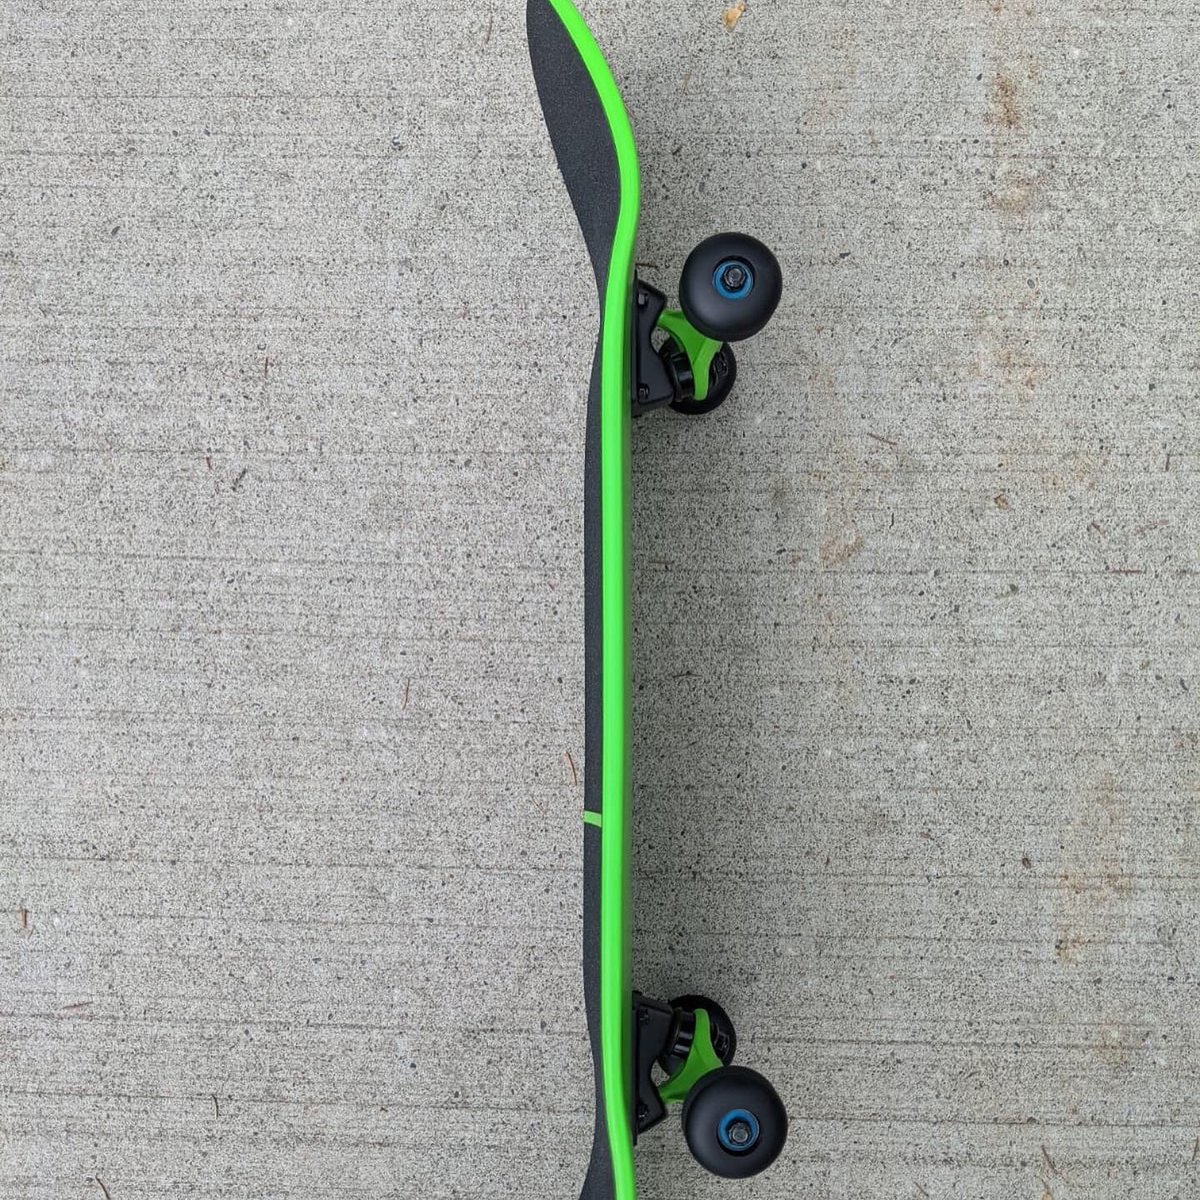 Image of Neon Green 7.5” Complete Skateboard